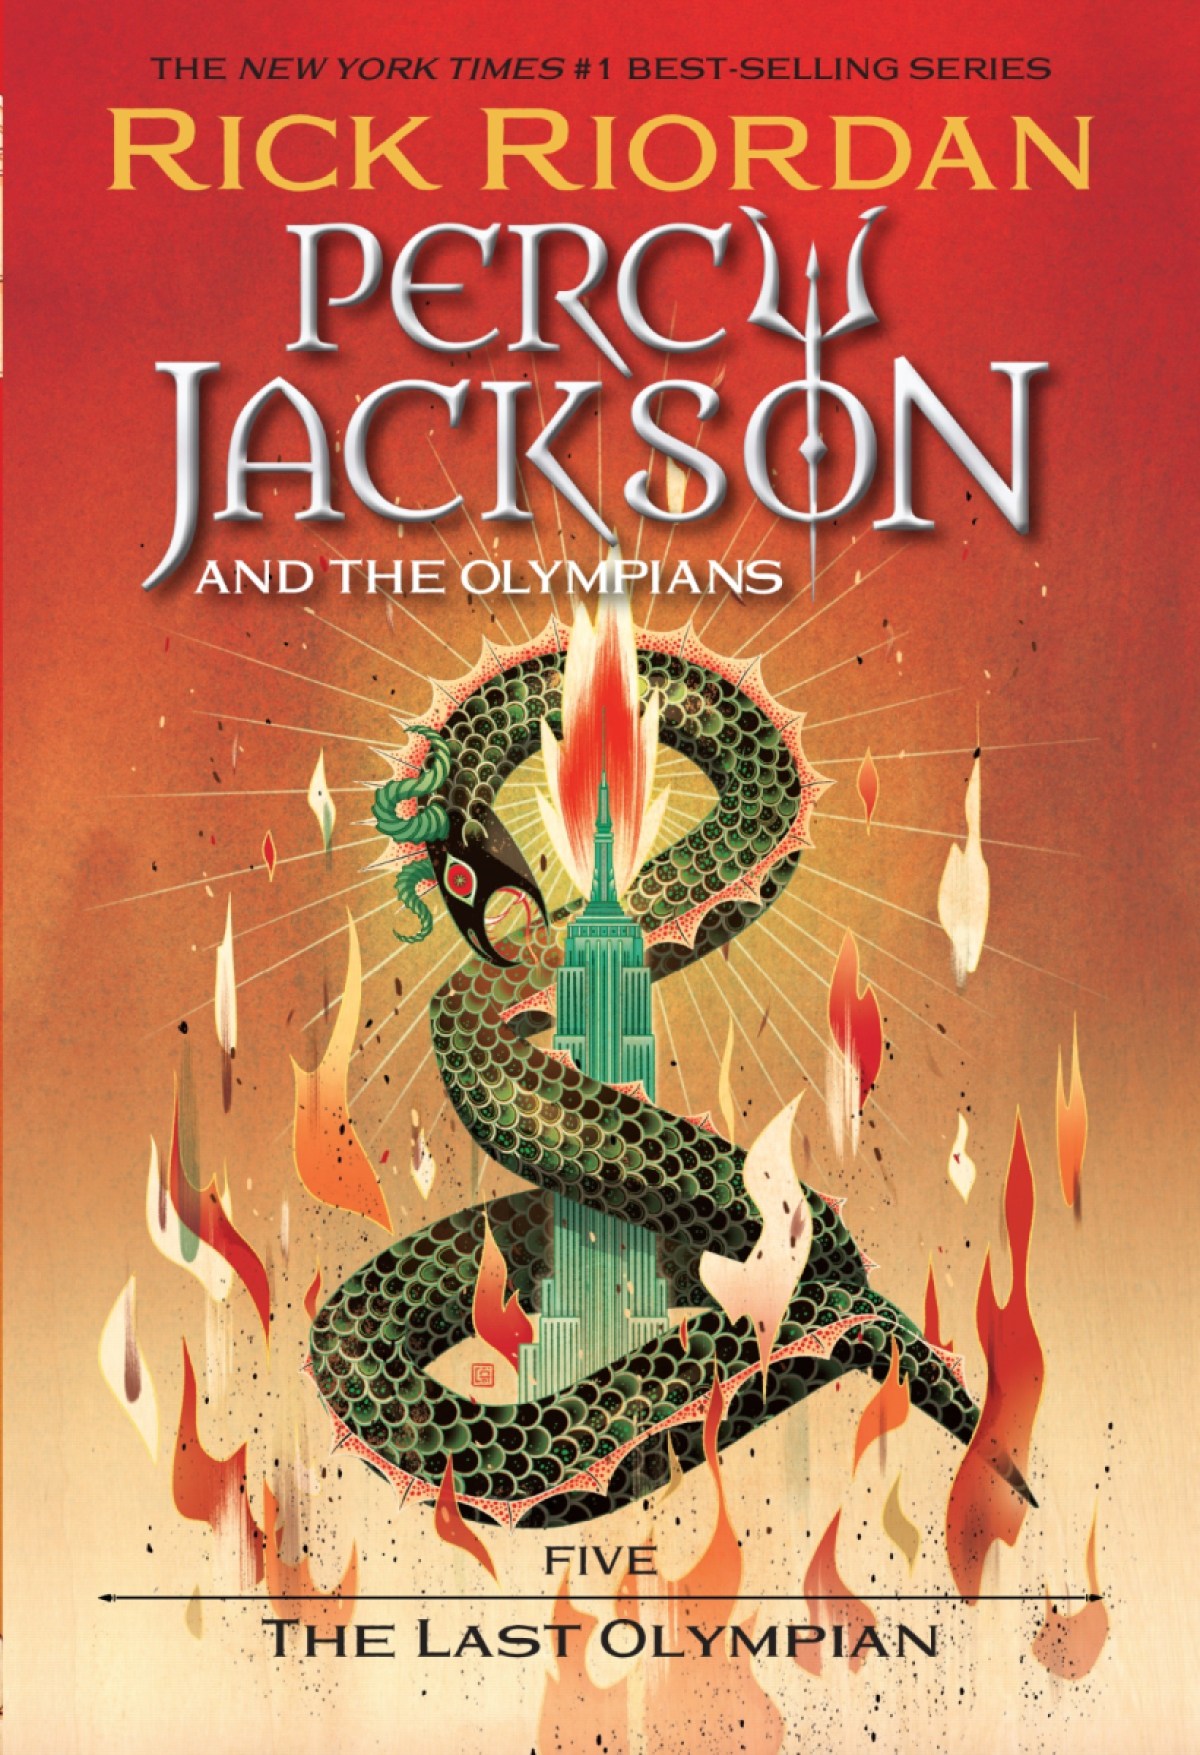 Percy Jackson and the Olympians Book 5 - The Last Olympian cover art (Disney Hyperion)